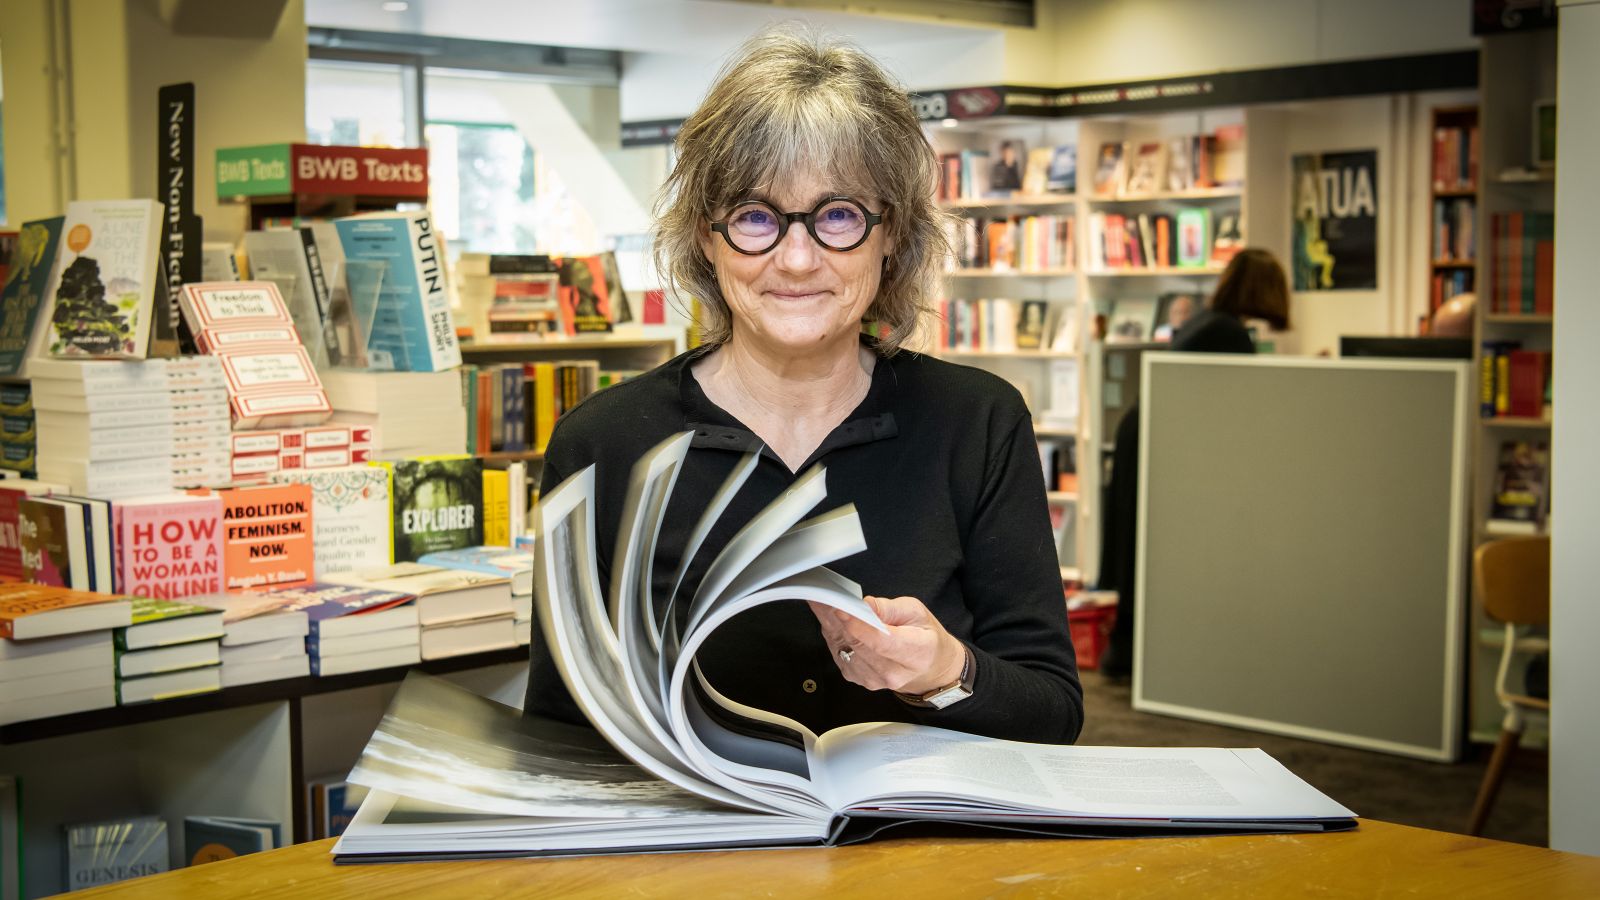 A woman with glasses flicks through a large book in a bookstore.